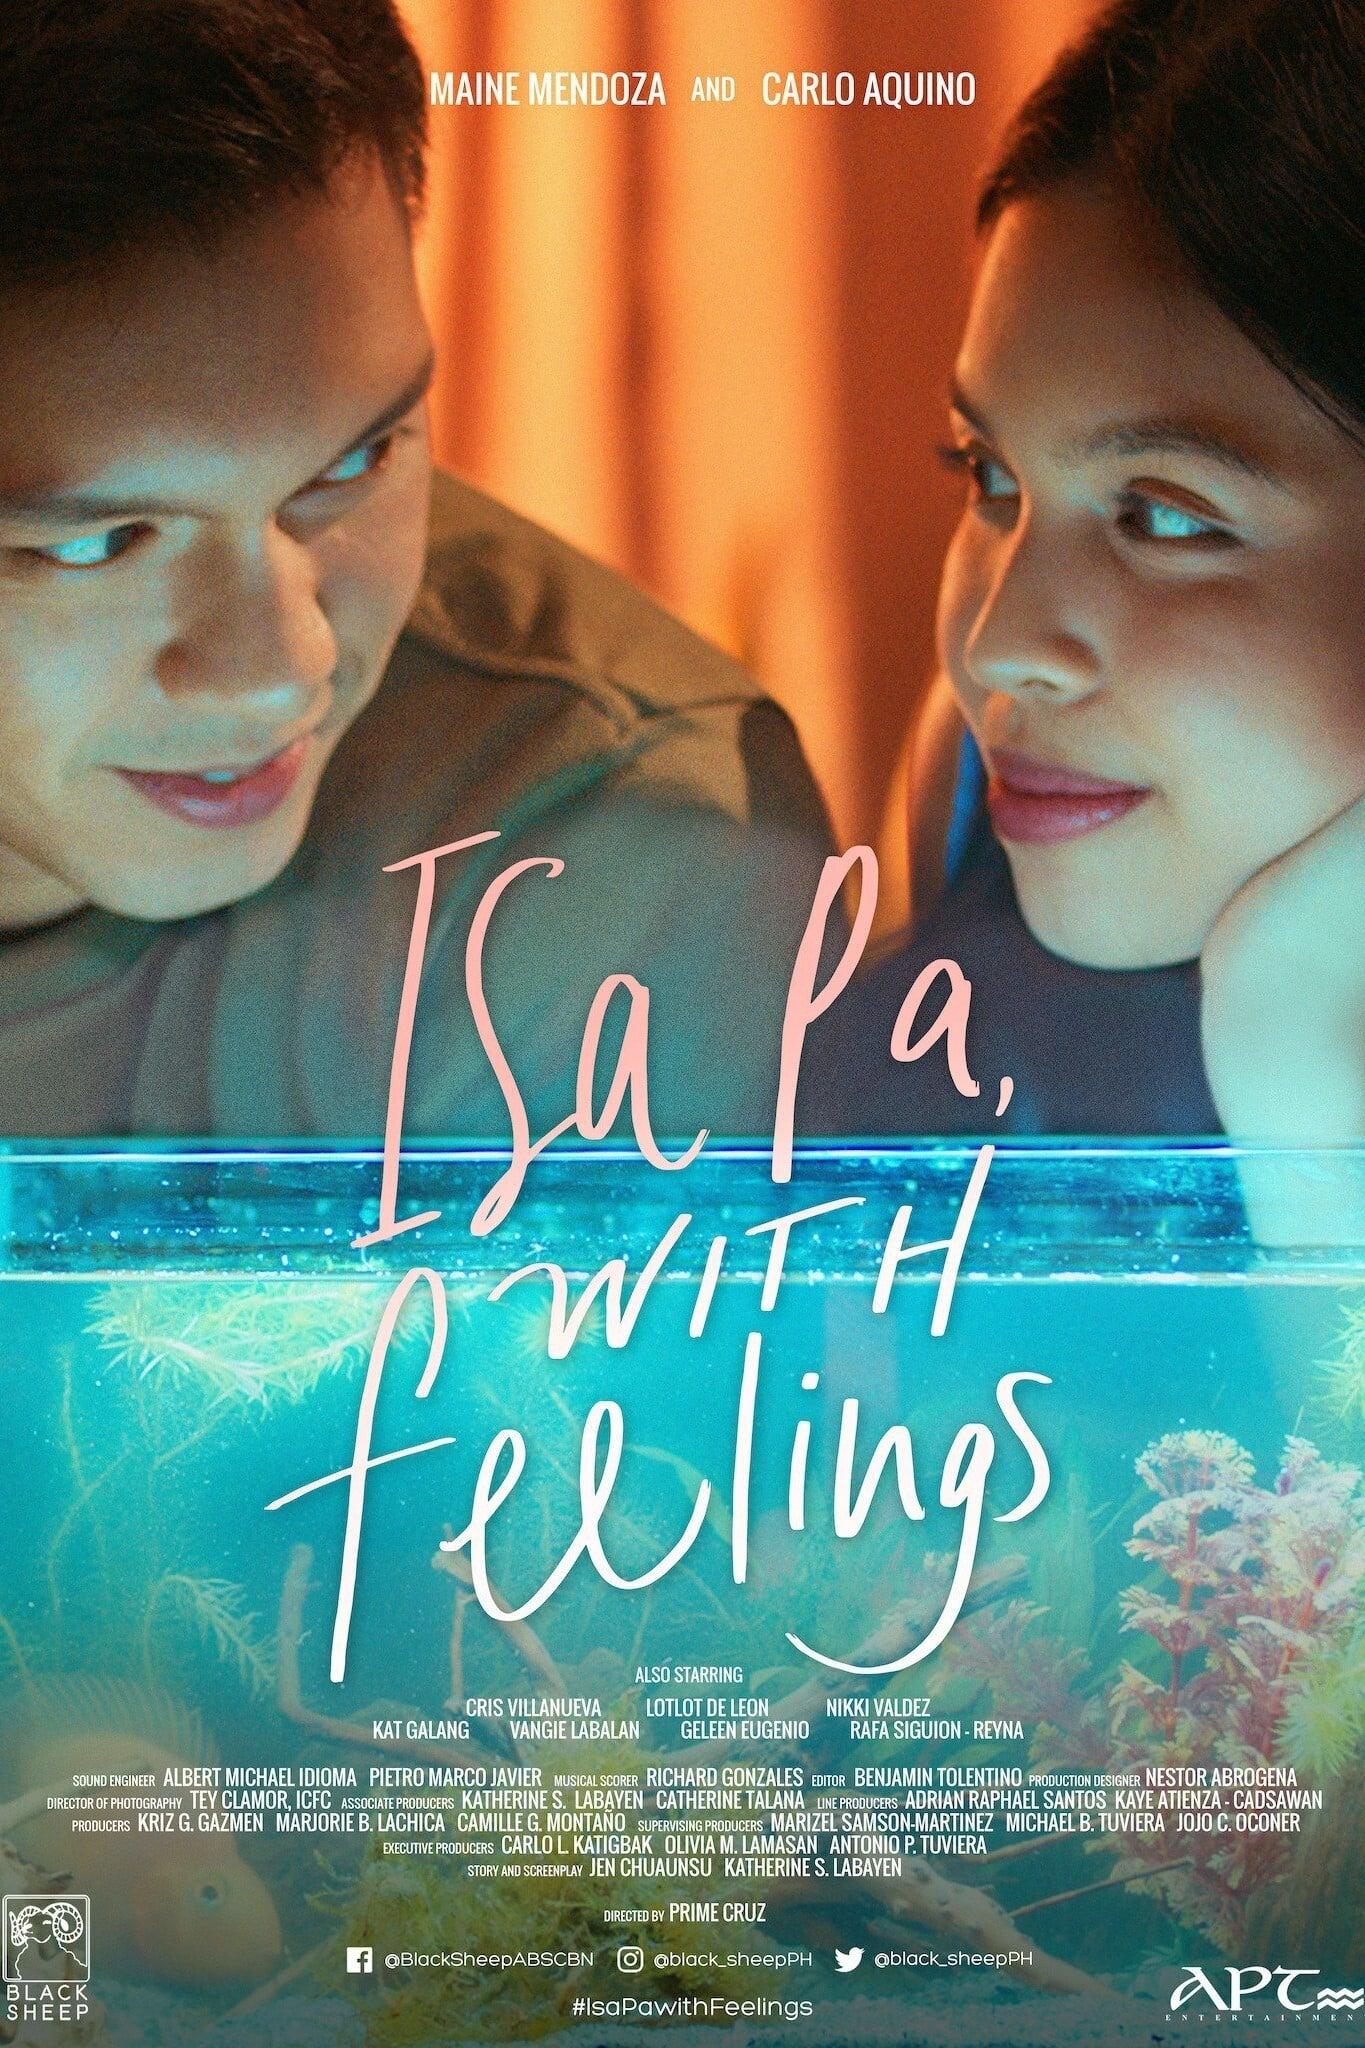 Isa Pa, with Feelings poster